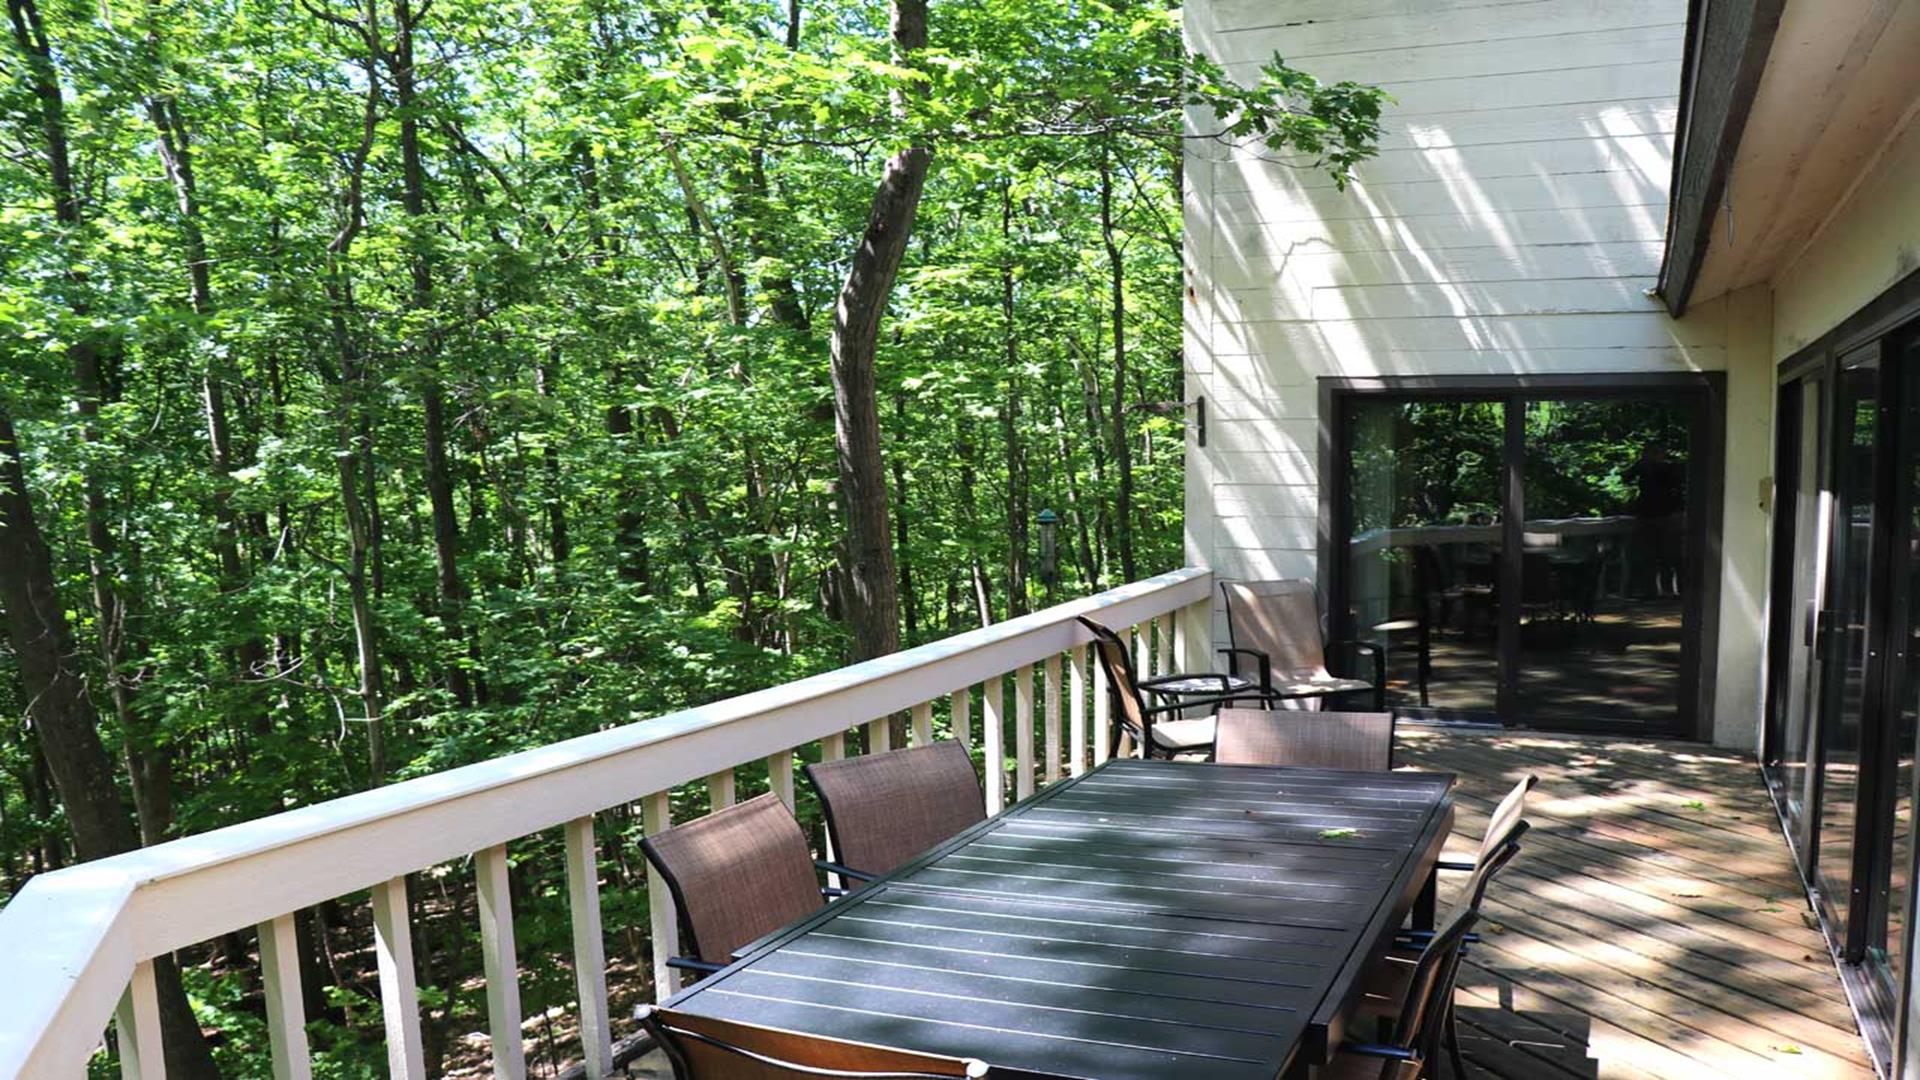 Back deck with patio furniture with seating for 8